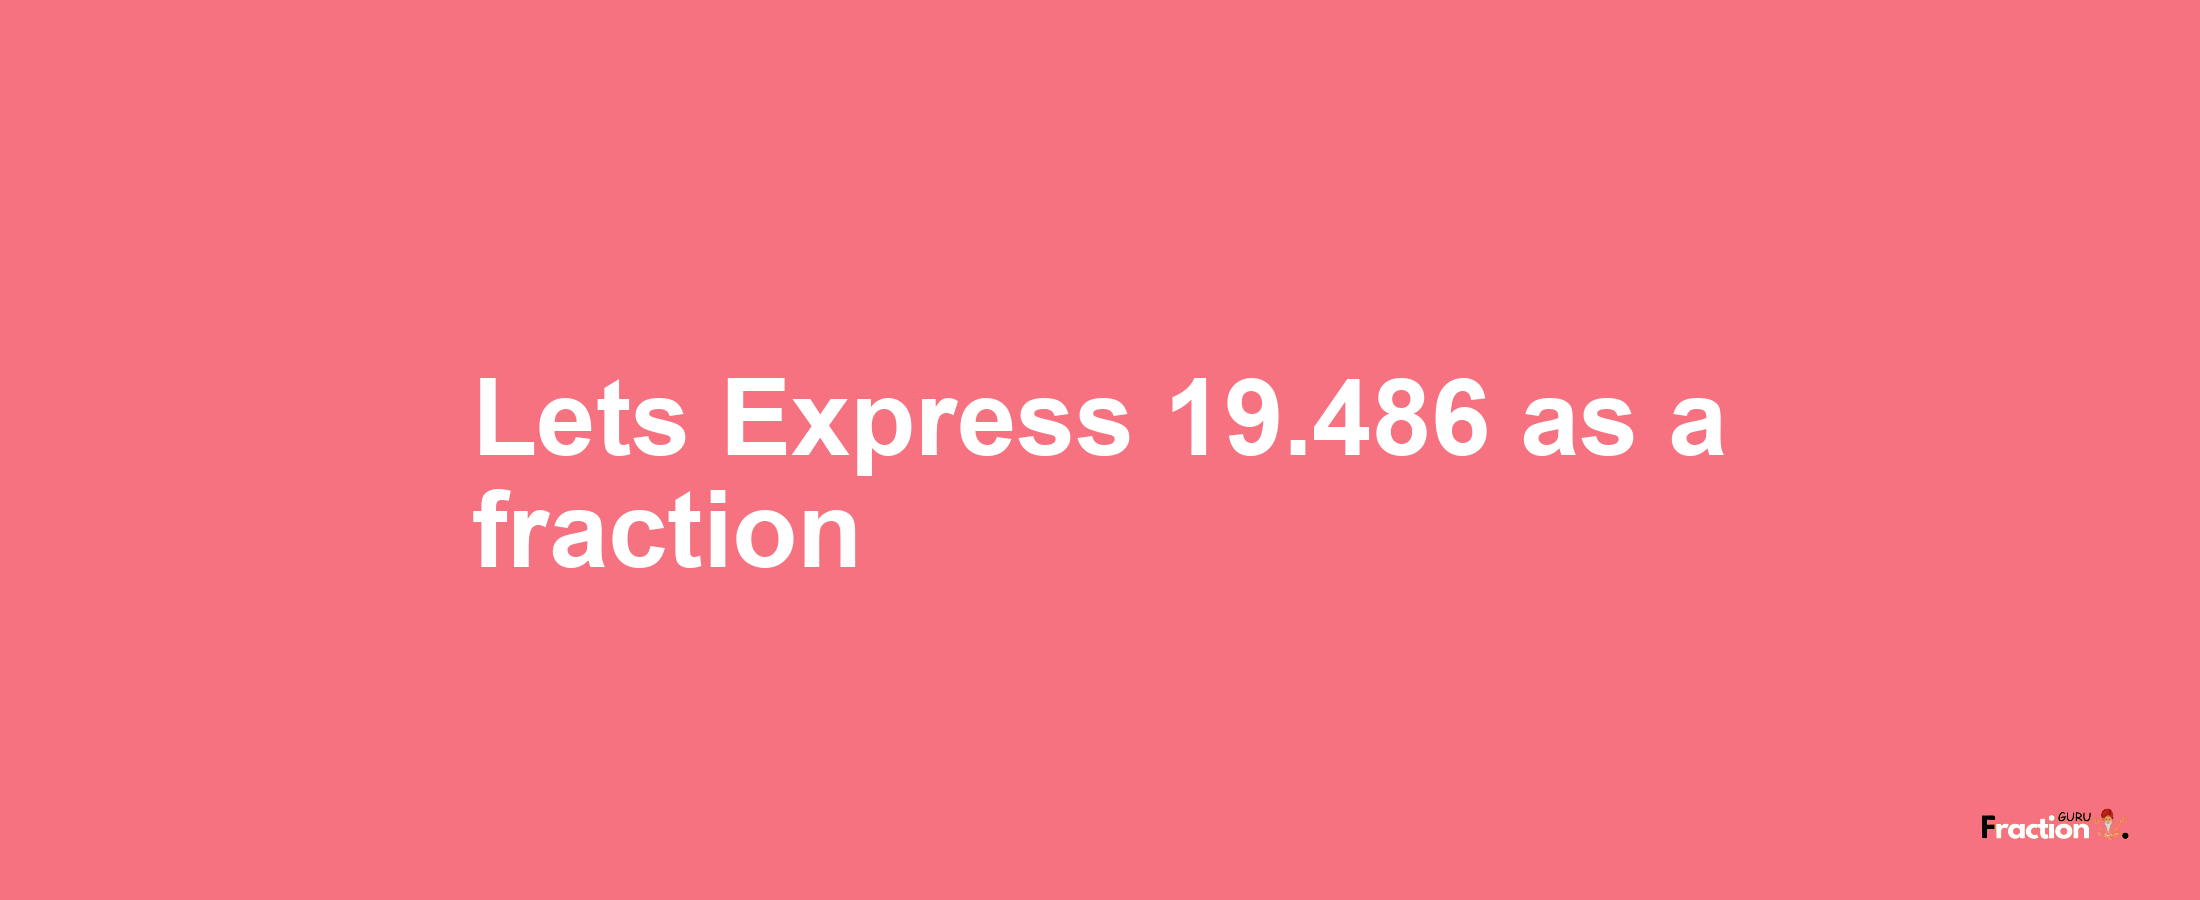 Lets Express 19.486 as afraction